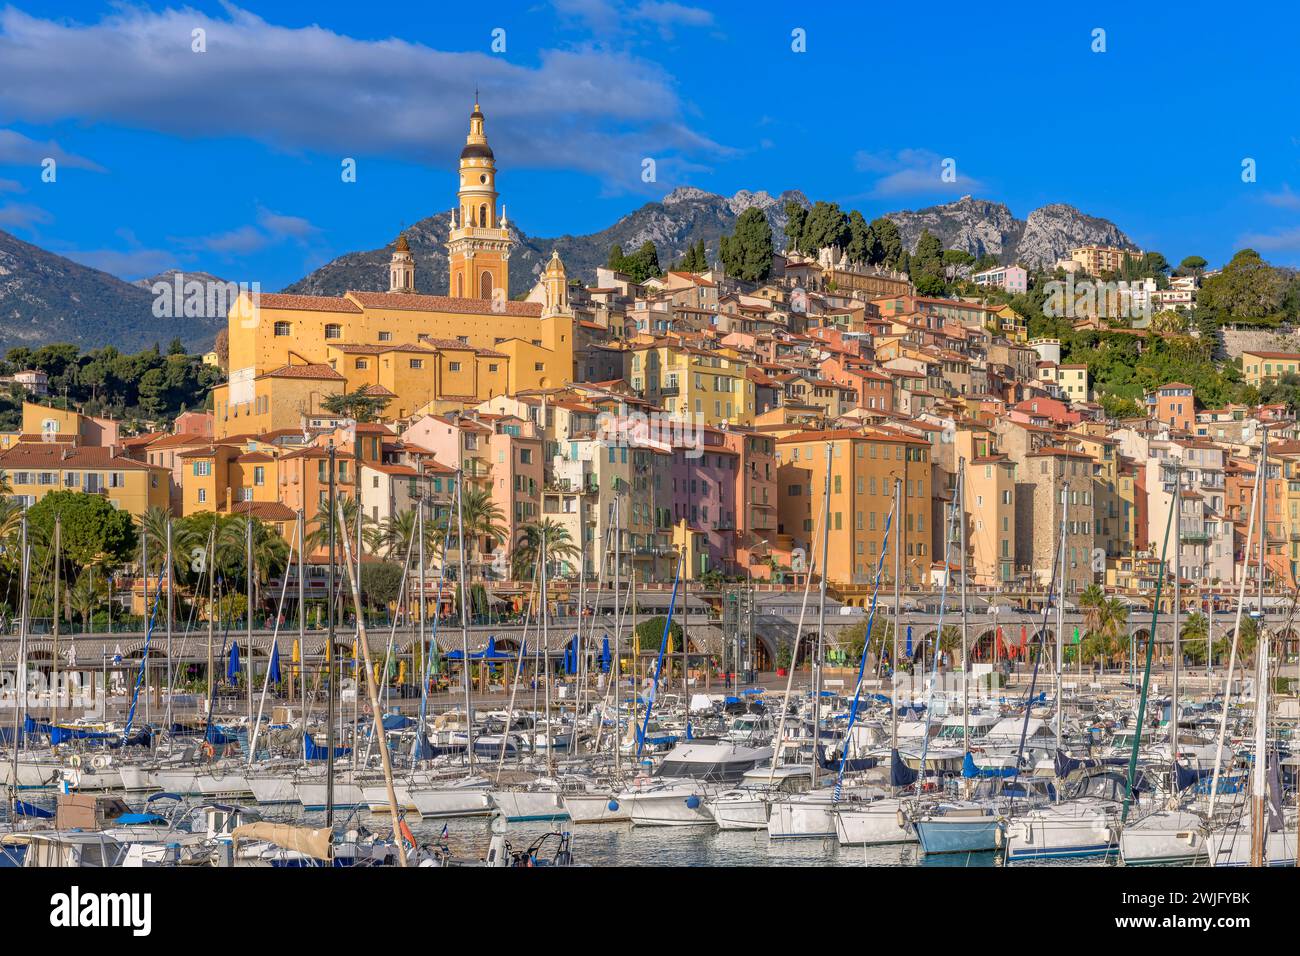 Beautiful Menton on the French Riviera - Côte d'Azur, France. Colourful houses rise up the hillside from the Old Port of Menton. Stock Photo